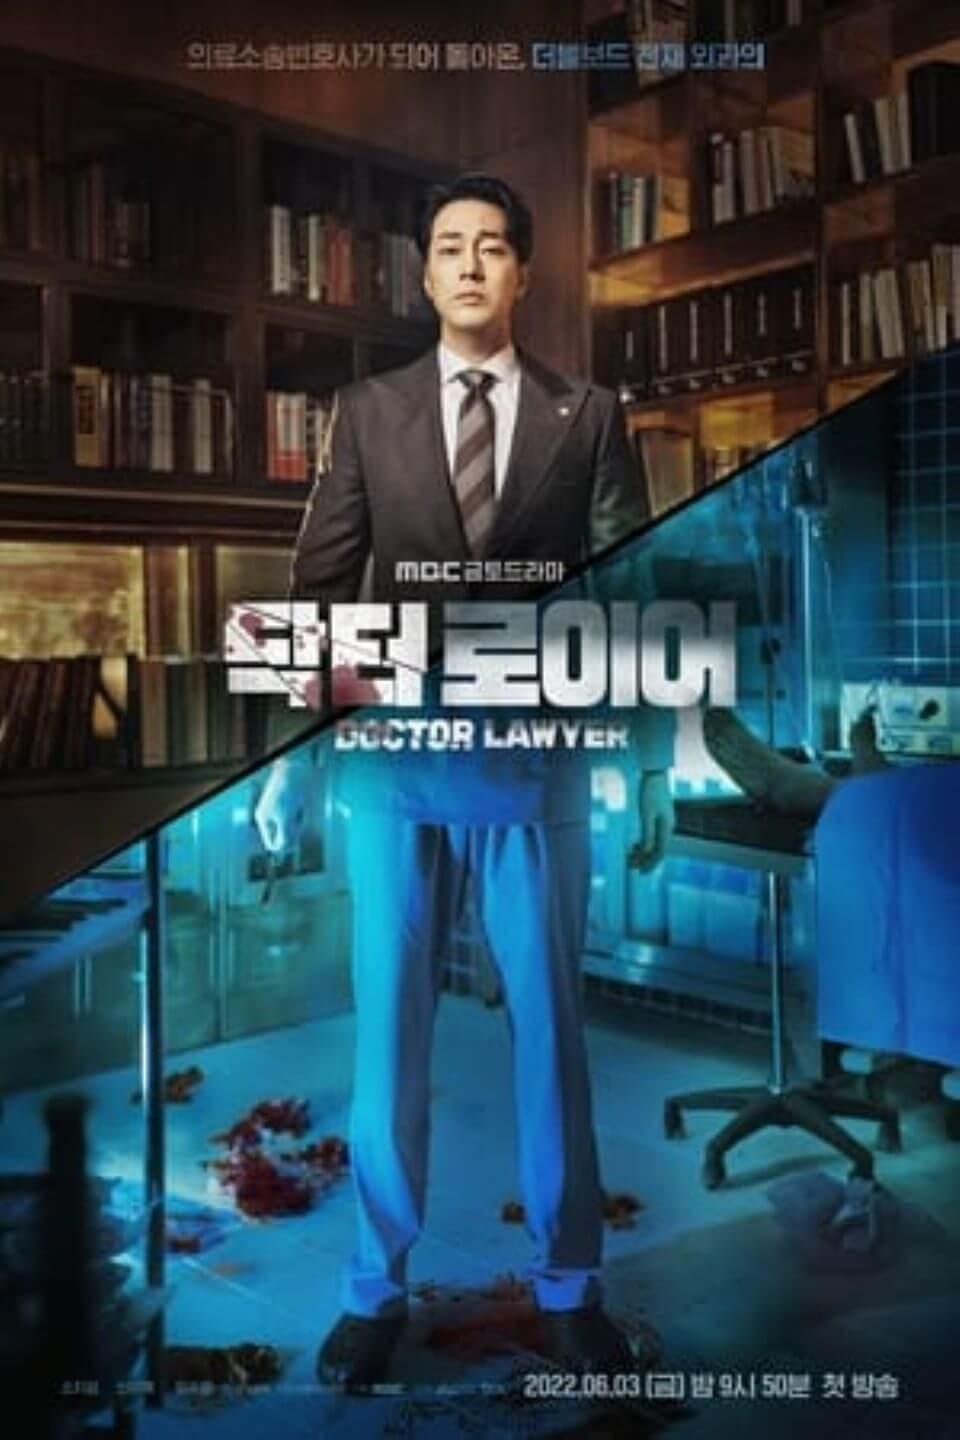 TV ratings for Doctor Lawyer (닥터 로이어) in Argentina. MBC TV series